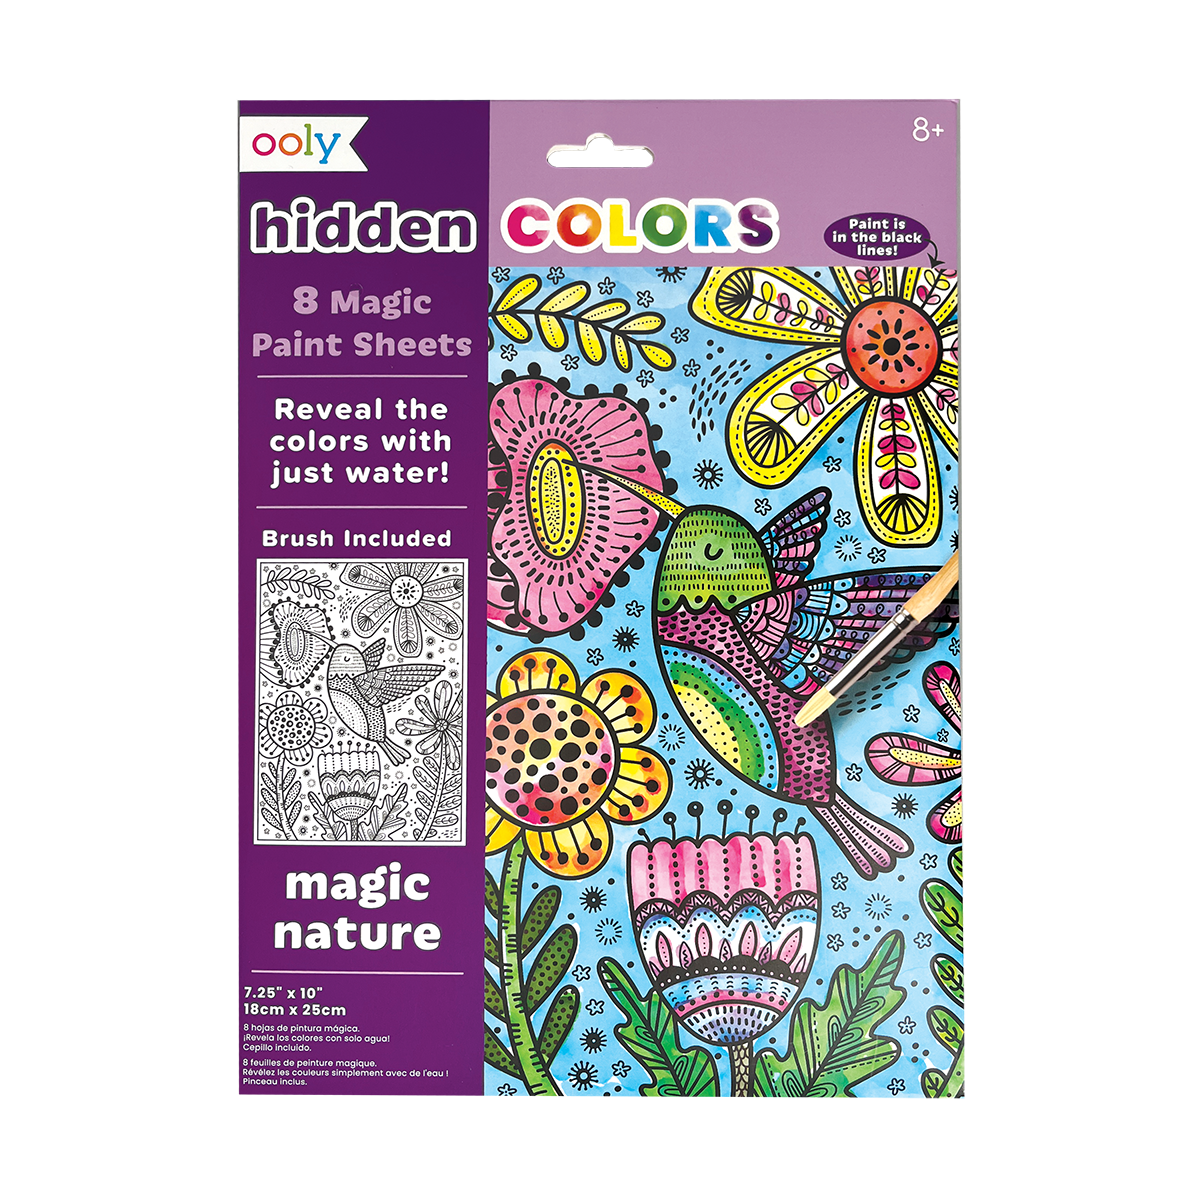 OOLY Hidden Colors Magic Paint Sheets - Magic Nature in packaging